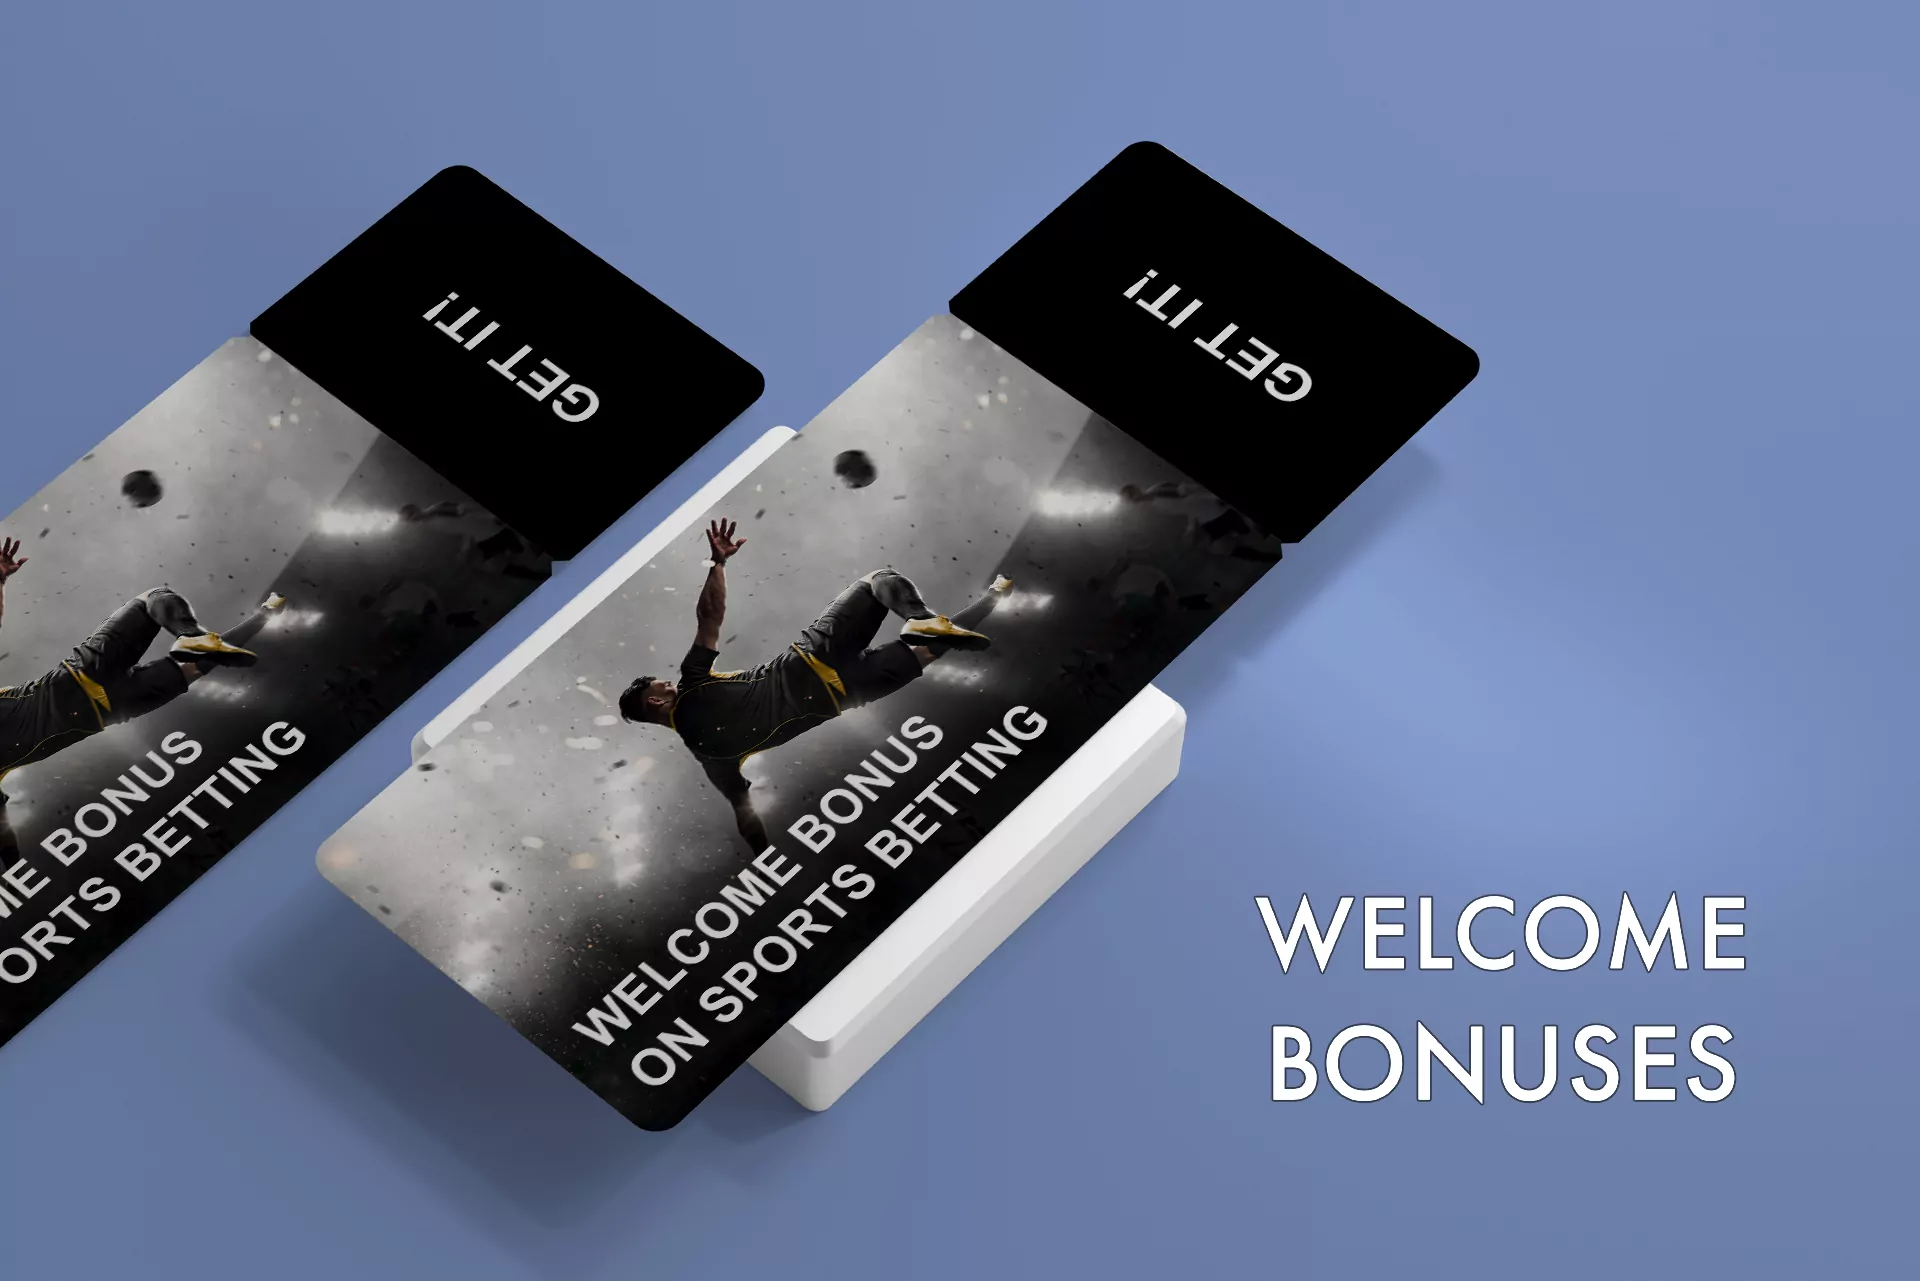 If you are a newbie, you can claim a welcome bonus from the bookmaker during registration on the site.